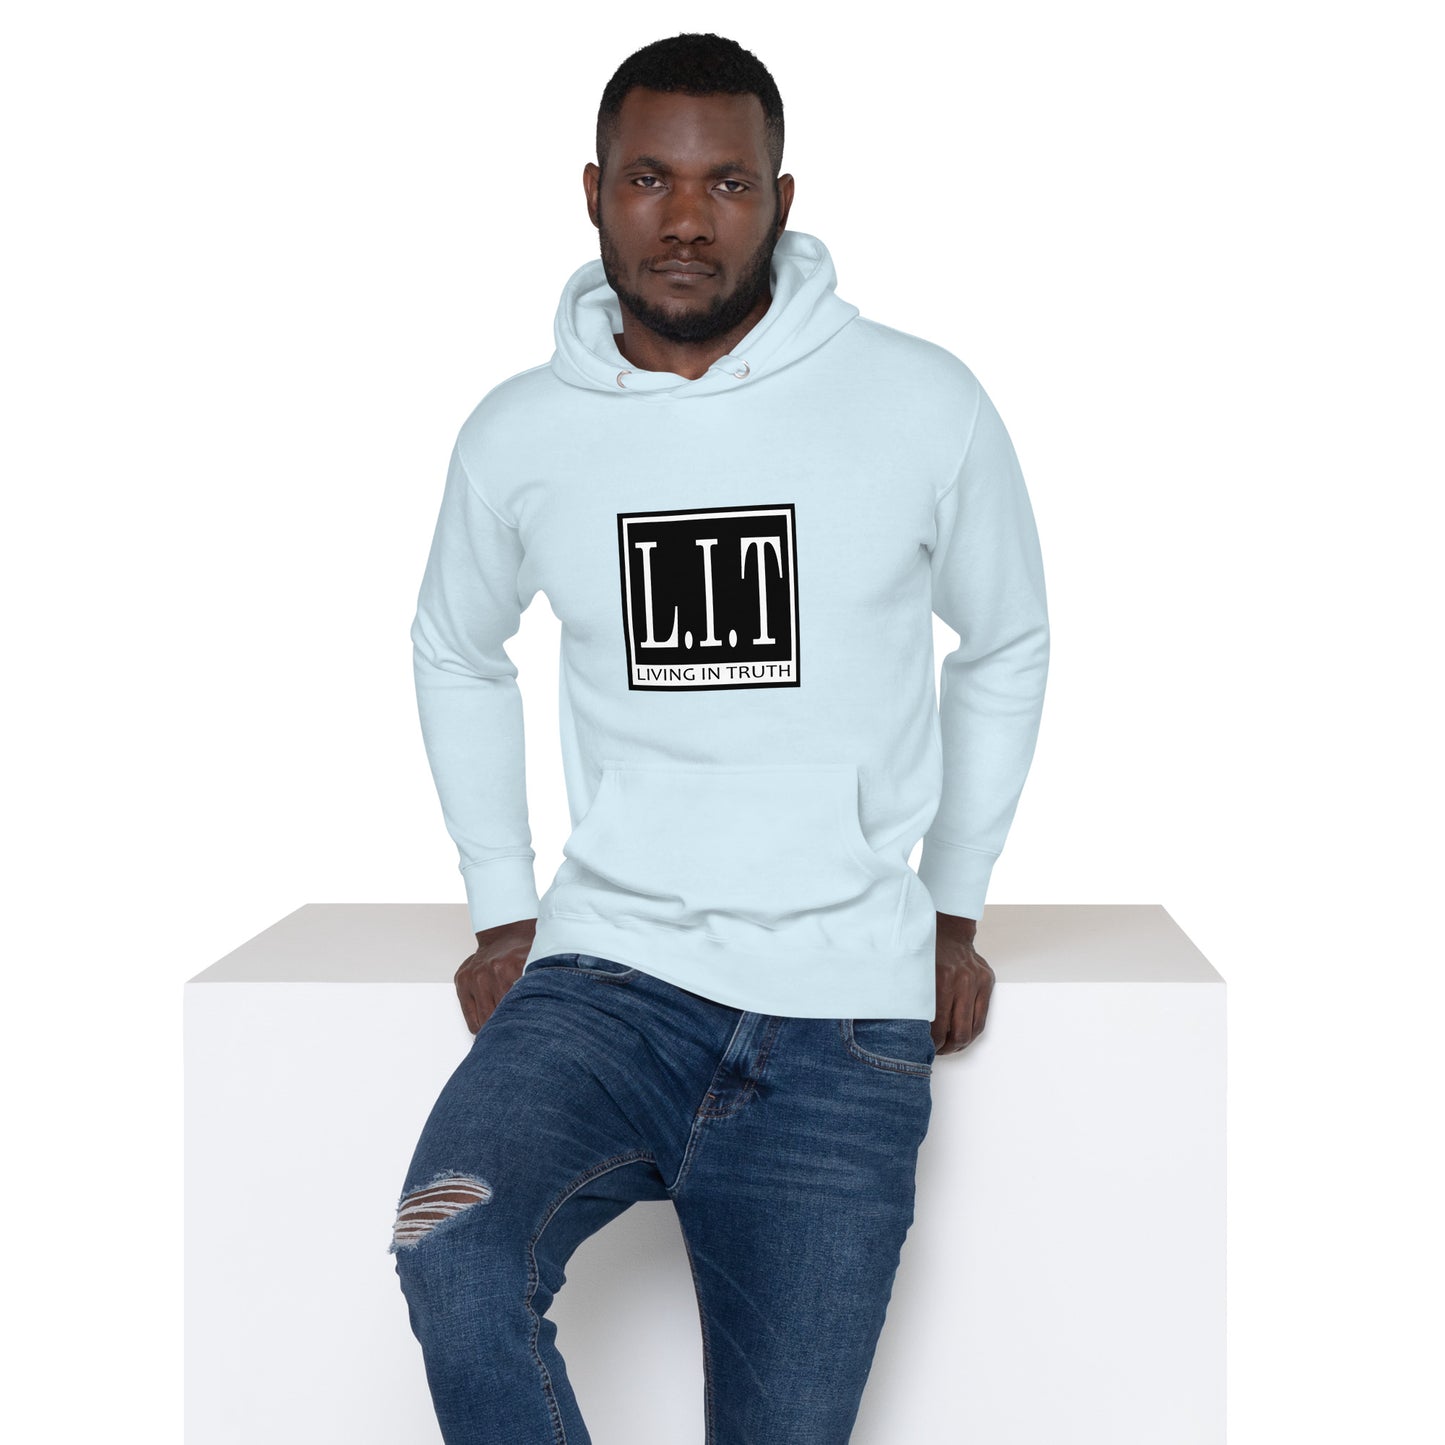 L.I.T. "Living In Truth" Unisex Hoodie